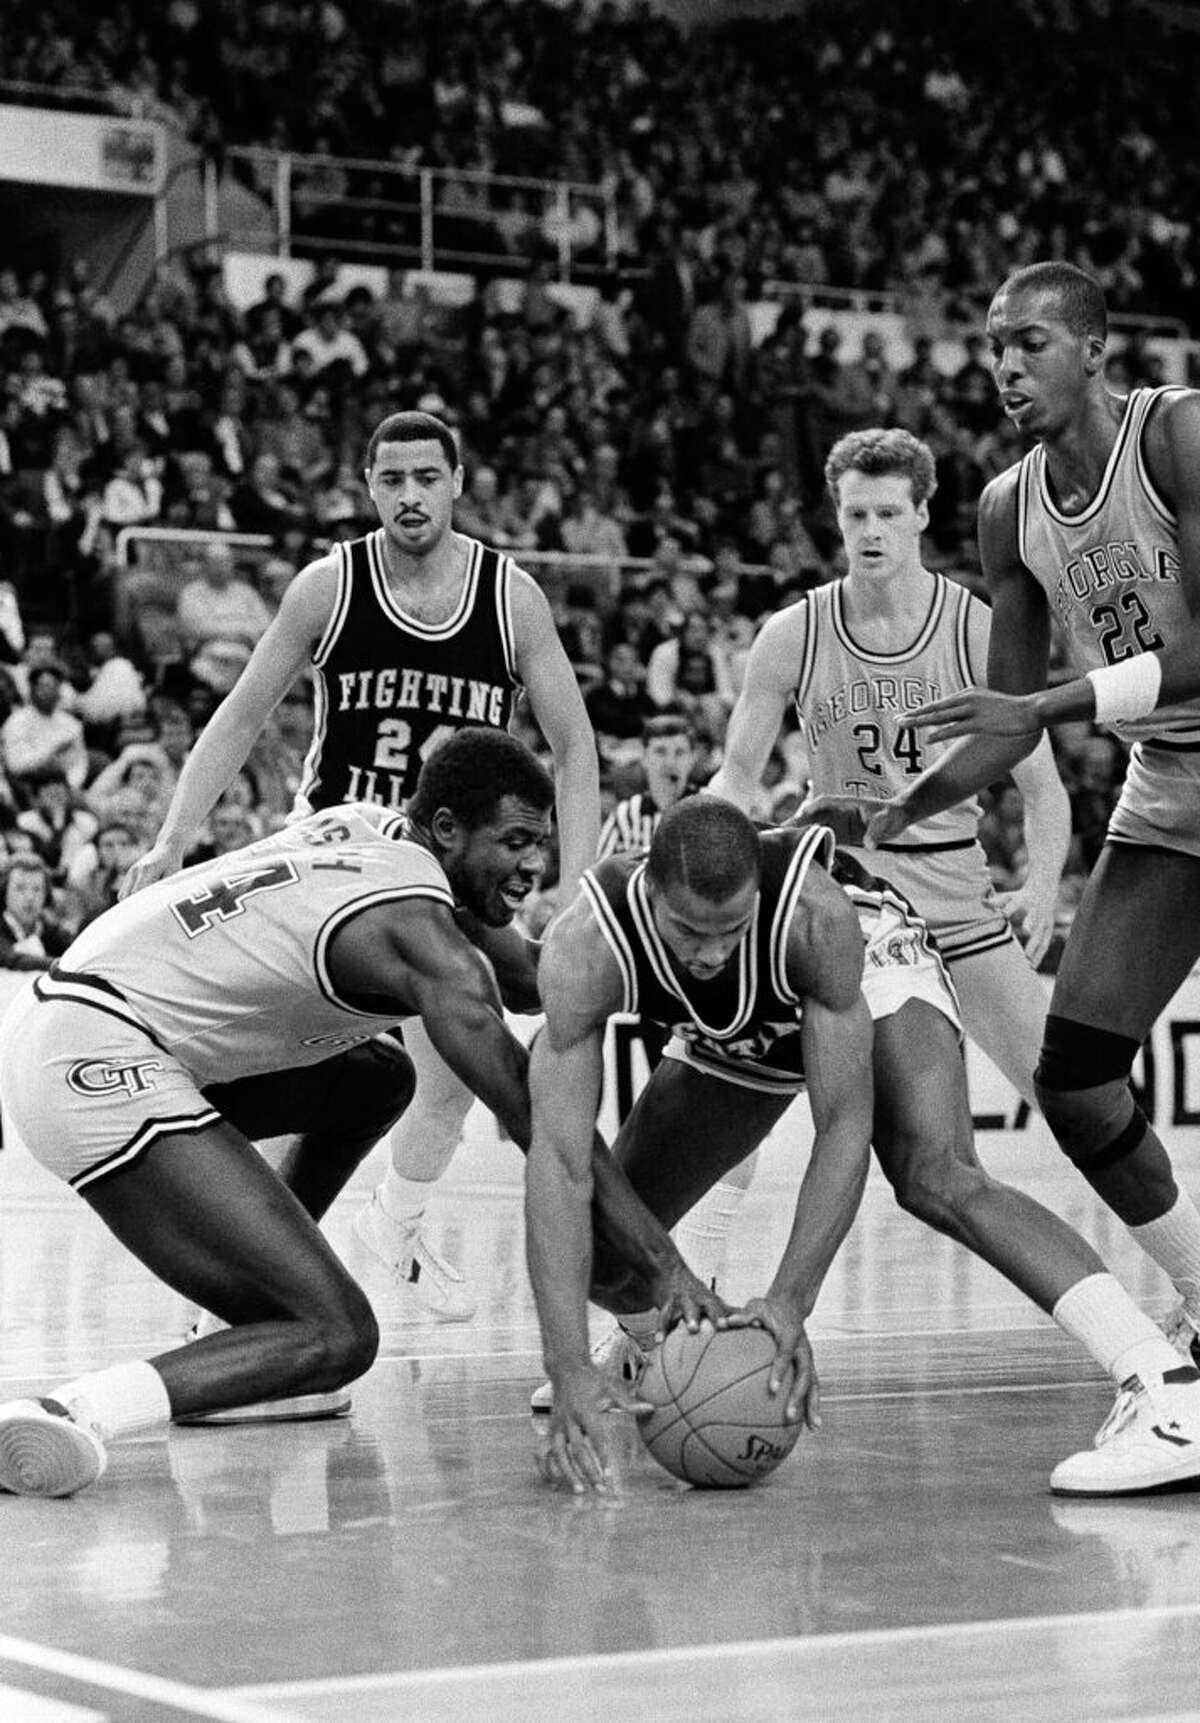 Yvon Joseph of Georgia Tech, left, tangles with Ken Norman of the Fighting Illini for a loose ball on the floor during first period action in NCAA East Regional semi-finals at Providence, R.I., March 21, 1985. 